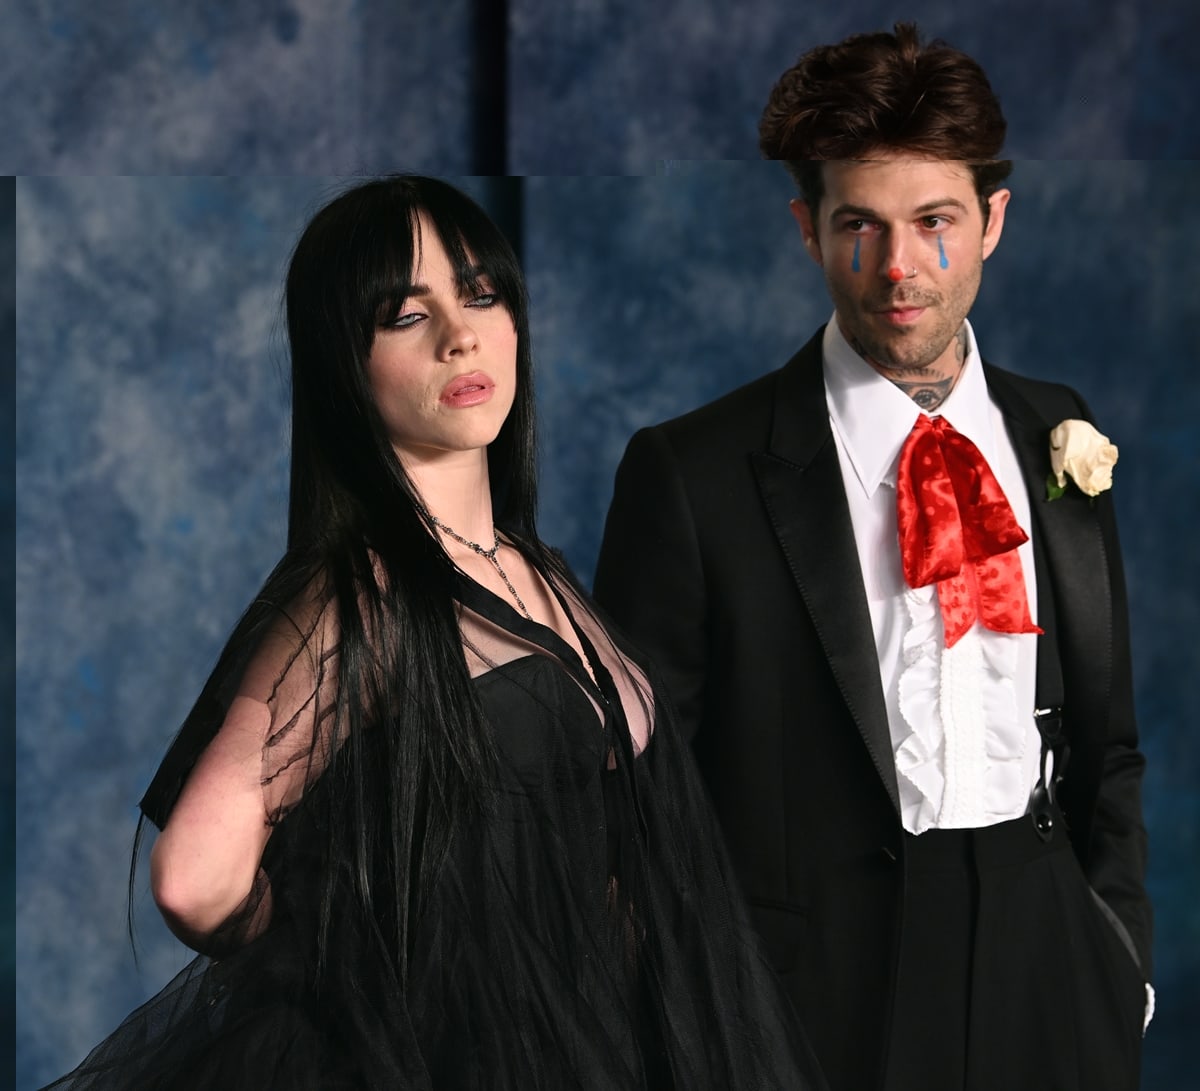 Billie Eilish was accompanied by her boyfriend Jesse Rutherford, who sported a black suit, a corsage, a quirky red necktie, and clown makeup